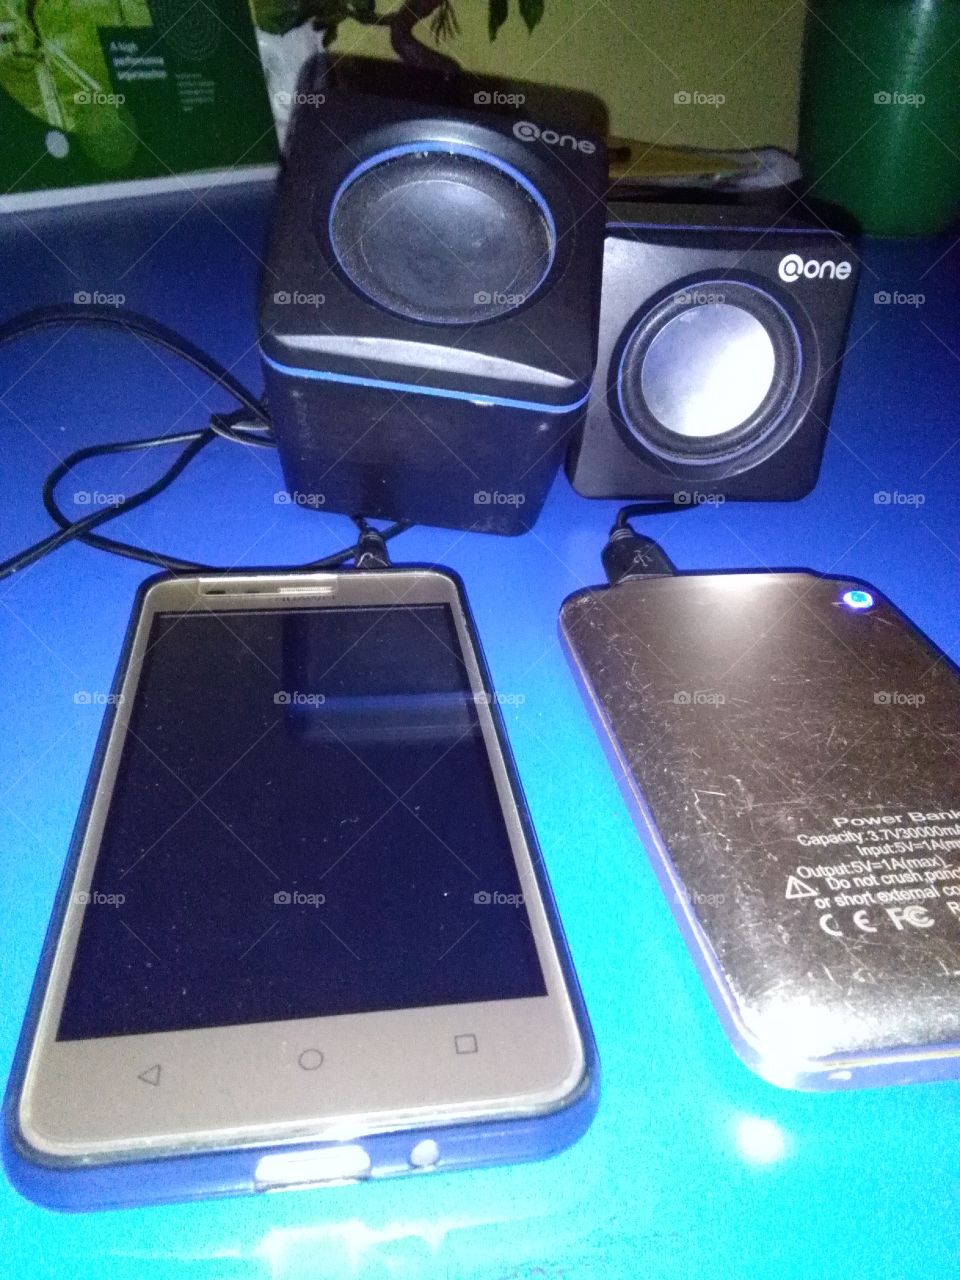 Phone,Power bank and Speaker